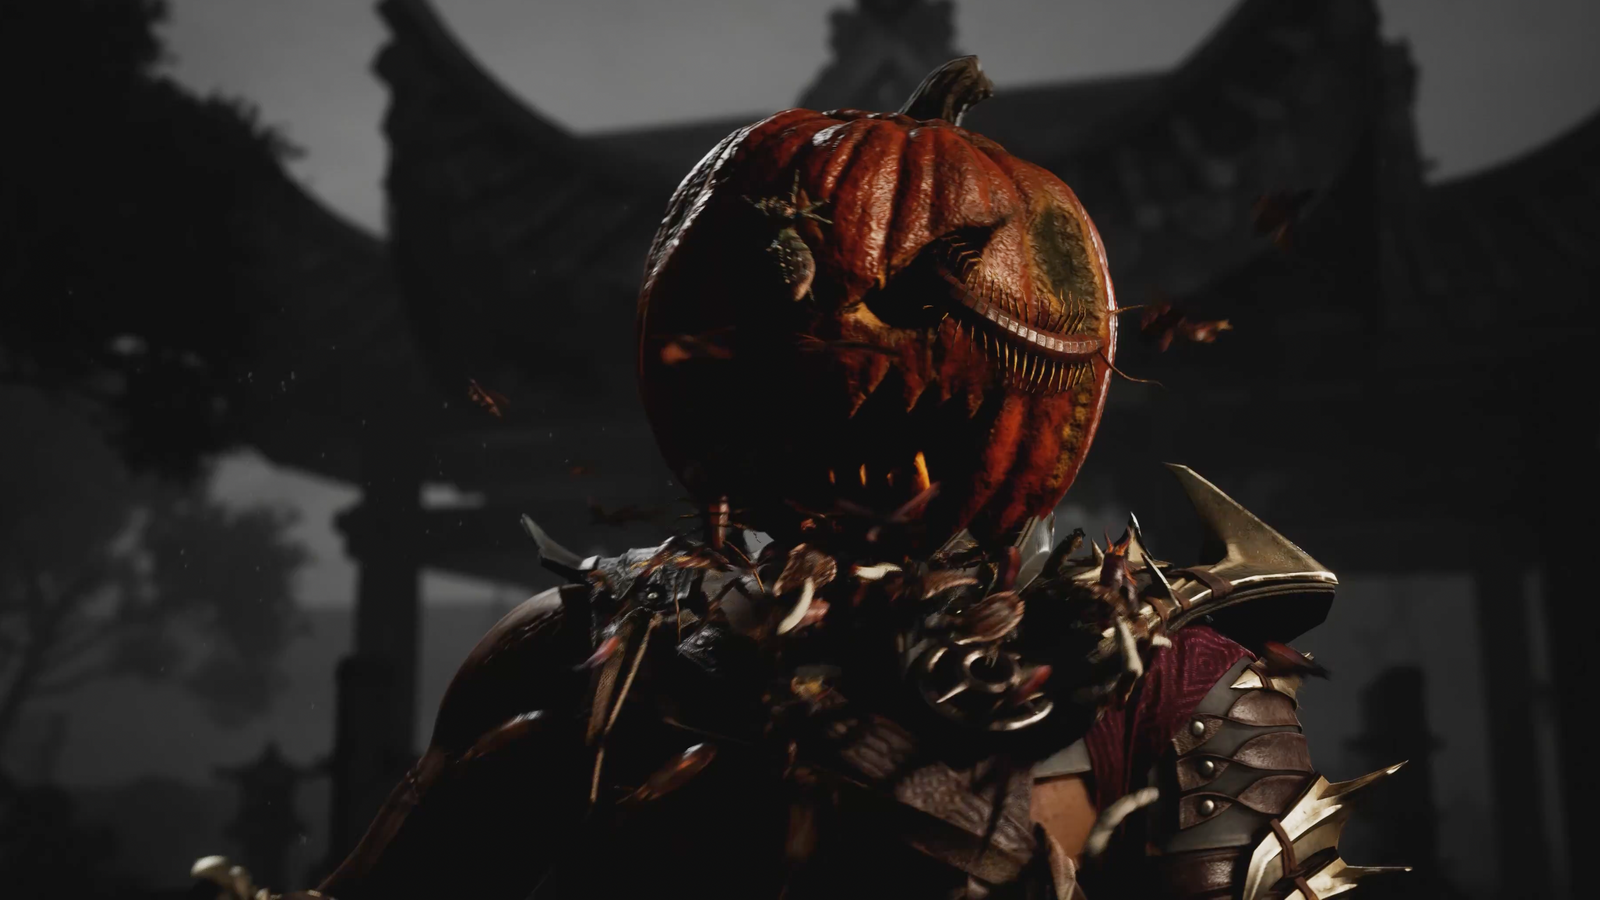 If you want the special halloween fatality in Mortal Kombat 1 you'll need  to pay - My Nintendo News